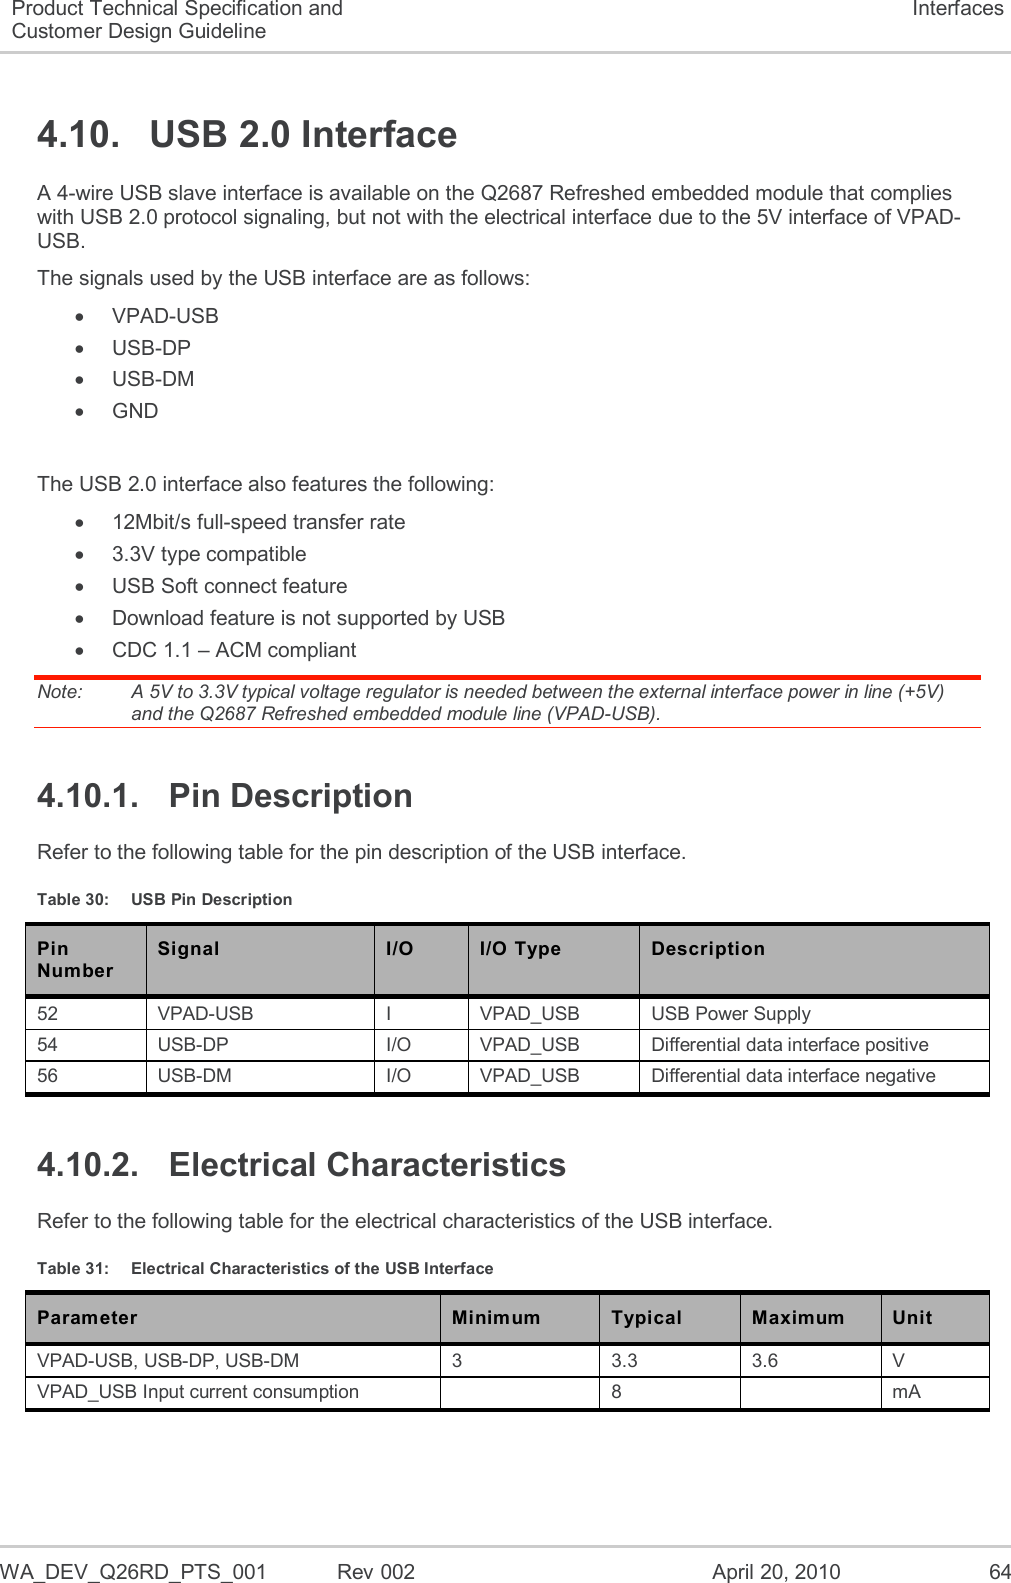  WA_DEV_Q26RD_PTS_001  Rev 002  April 20, 2010 64 Product Technical Specification and Customer Design Guideline Interfaces 4.10.  USB 2.0 Interface A 4-wire USB slave interface is available on the Q2687 Refreshed embedded module that complies with USB 2.0 protocol signaling, but not with the electrical interface due to the 5V interface of VPAD-USB.  The signals used by the USB interface are as follows:  VPAD-USB   USB-DP   USB-DM   GND  The USB 2.0 interface also features the following:   12Mbit/s full-speed transfer rate   3.3V type compatible   USB Soft connect feature  Download feature is not supported by USB   CDC 1.1 – ACM compliant Note:   A 5V to 3.3V typical voltage regulator is needed between the external interface power in line (+5V) and the Q2687 Refreshed embedded module line (VPAD-USB). 4.10.1.  Pin Description Refer to the following table for the pin description of the USB interface. Table 30:  USB Pin Description Pin Number Signal I/O I/O Type Description 52 VPAD-USB I VPAD_USB USB Power Supply  54 USB-DP I/O VPAD_USB Differential data interface positive 56 USB-DM I/O VPAD_USB Differential data interface negative 4.10.2.  Electrical Characteristics Refer to the following table for the electrical characteristics of the USB interface. Table 31:  Electrical Characteristics of the USB Interface Parameter Minimum Typical Maximum Unit VPAD-USB, USB-DP, USB-DM 3 3.3 3.6 V VPAD_USB Input current consumption  8  mA 